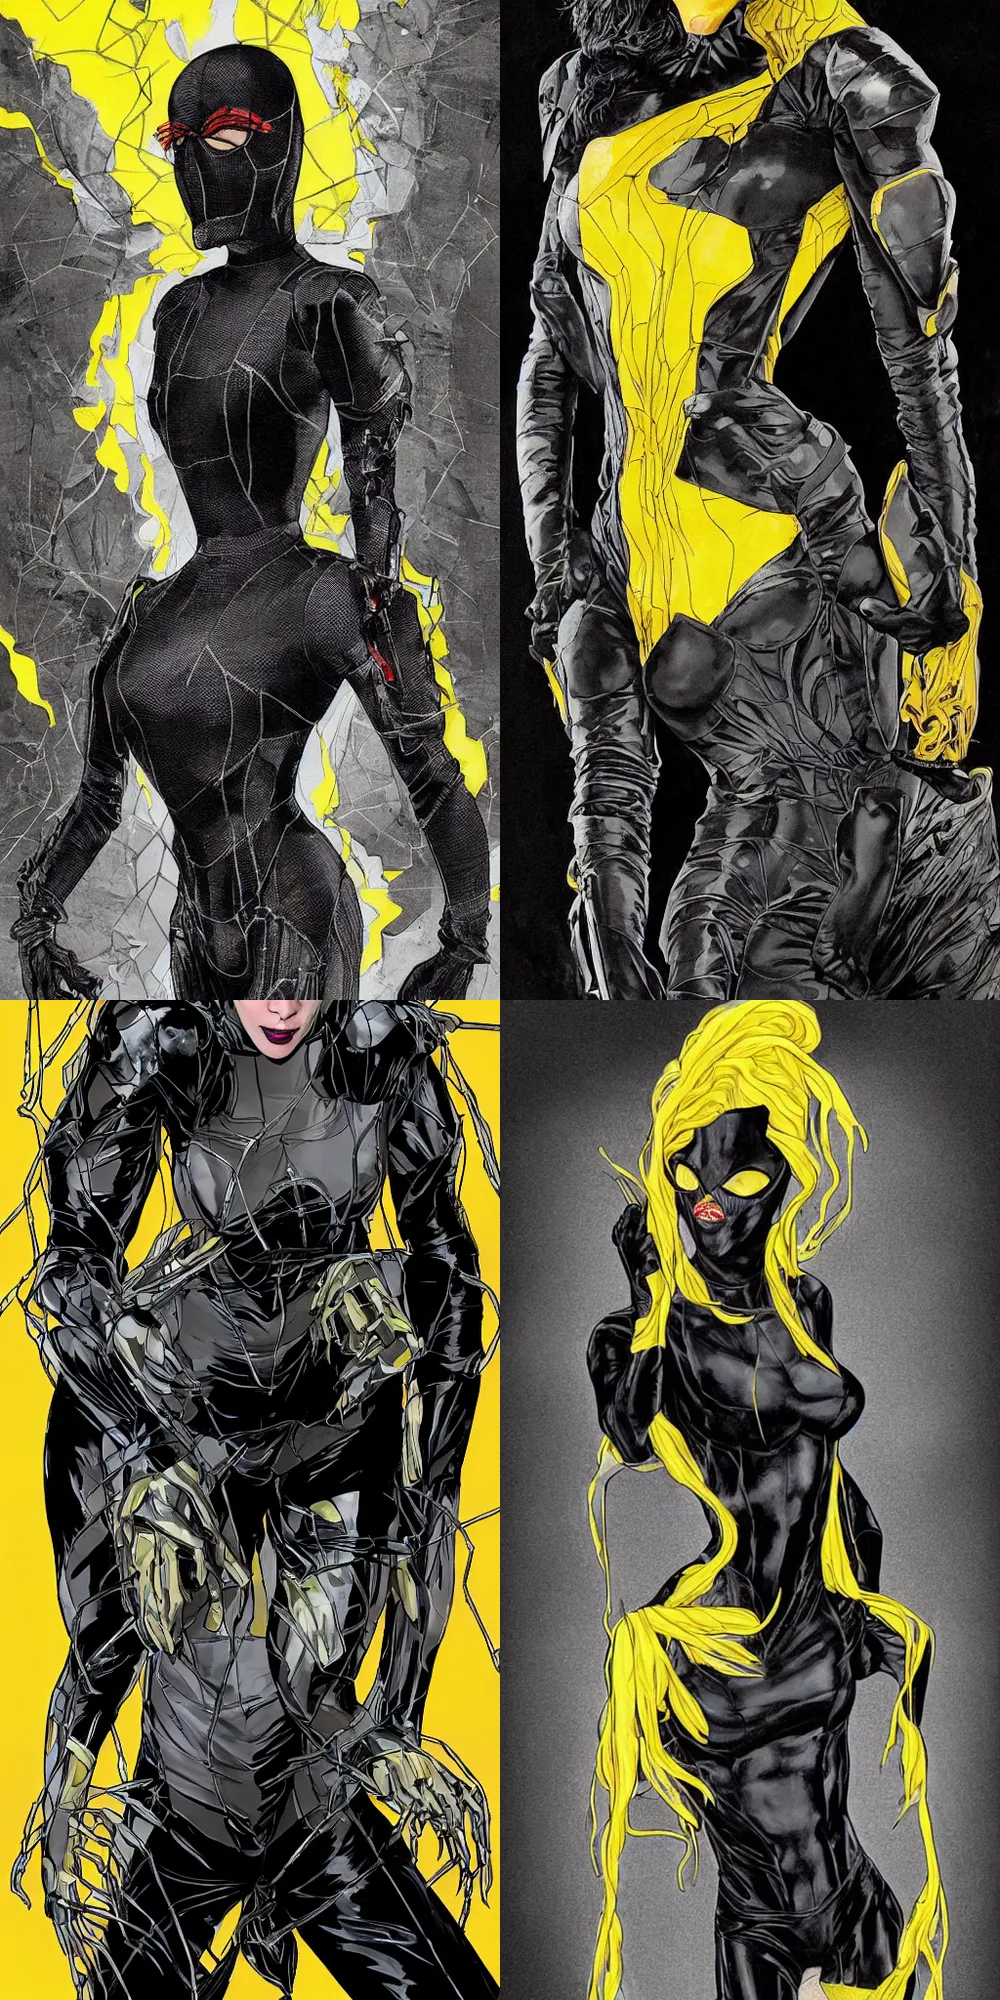 Prompt: Joe Quesada Artwork of full body portrait of Skitter, Taylor wore various costumes made of spider silk. Initially, she wears a black-and-grey spider silk bodysuit with armor panels made out of insect shells and exoskeletons augmented with more spider silk. She dyes it black with grey paneling before she goes out. The yellow lenses of her mask are durable, high-end swim goggles tinted to help filter out bright lights, with lenses from an old pair of her glasses sealed inside with silicon. Her mask leaves the back of her head uncovered and her hair free to fly behind her. The costume lacks the full extent of the armor paneling she planned, including protection for the back of her head, but the armor covers her face, chest, spine, stomach and major joints (including wrists, shoulders, elbows and knees). Each had \'layers\' resembling a pillbug. The mask design features dull yellow lenses and sections of armor designed to imitate a bug’s mandibles. She kept her costume clean by having bugs eat and clean any waste and wiping it down with a cloth. The spider-silk fabric is too tough to cut with an x-acto knife, although it can be slowly cut through using wire cutters. It was mostly waterproof. Prior to dying, the costume\'s prototype had fabric that was a dirty yellow-gray color, and the armour was naturally a dark mottled brown-gray. full body Artwork by Joe Quesada